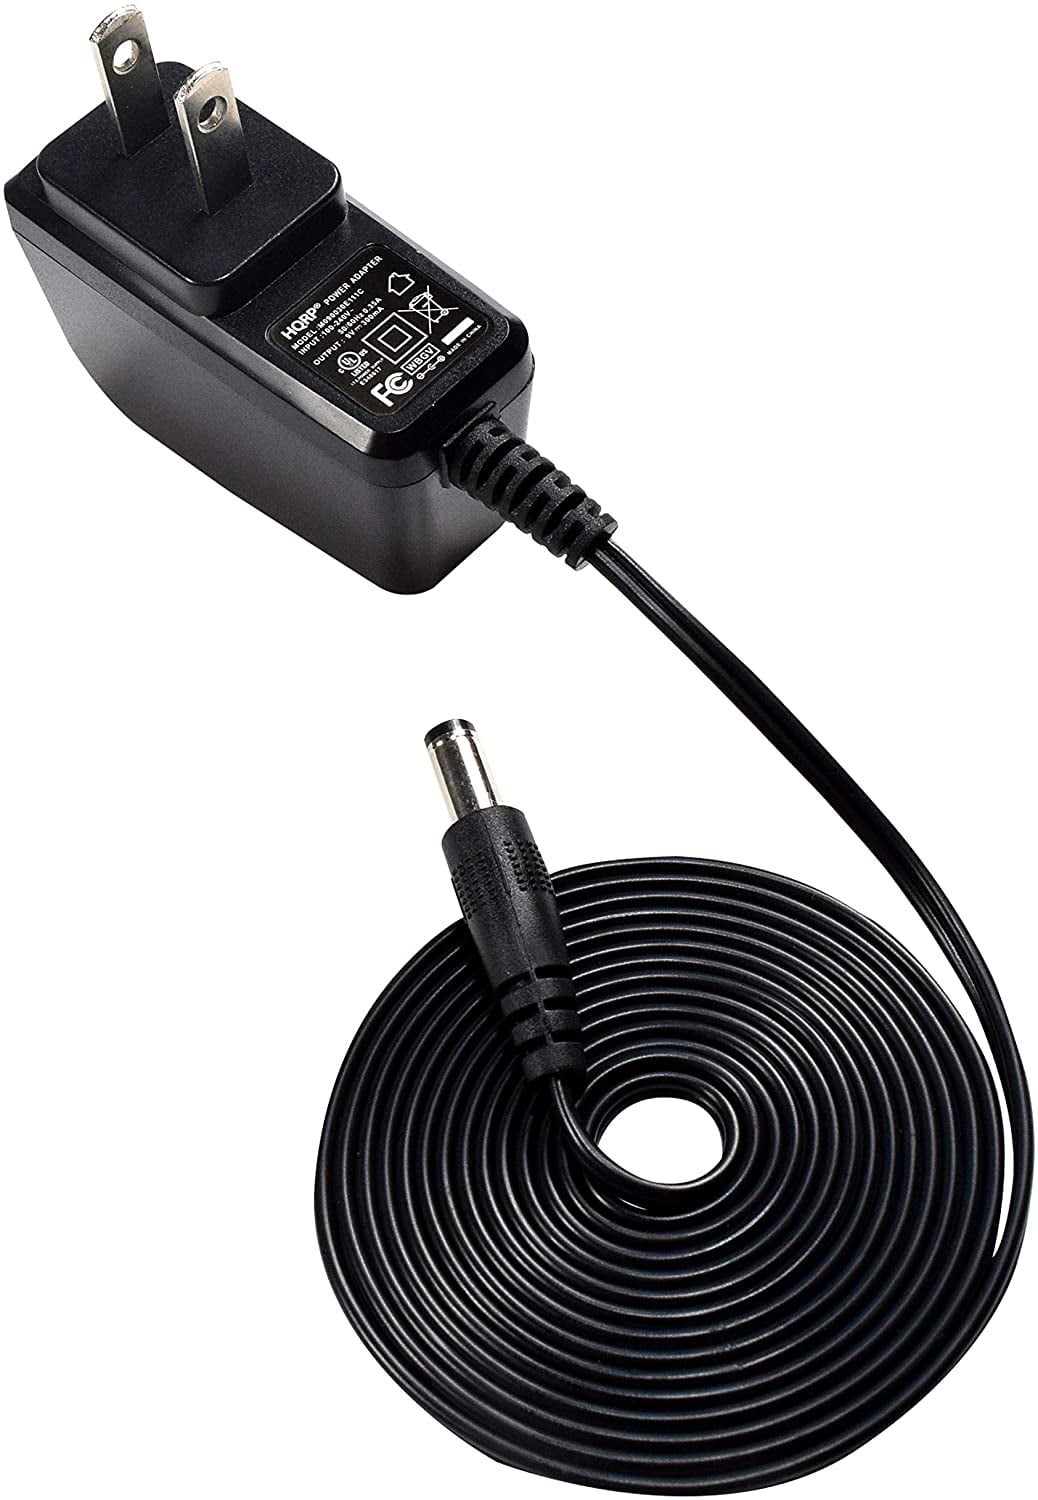 MyVolts 9V DC power cable compatible with Fender 57 Mini-twin Amplifier UK plug